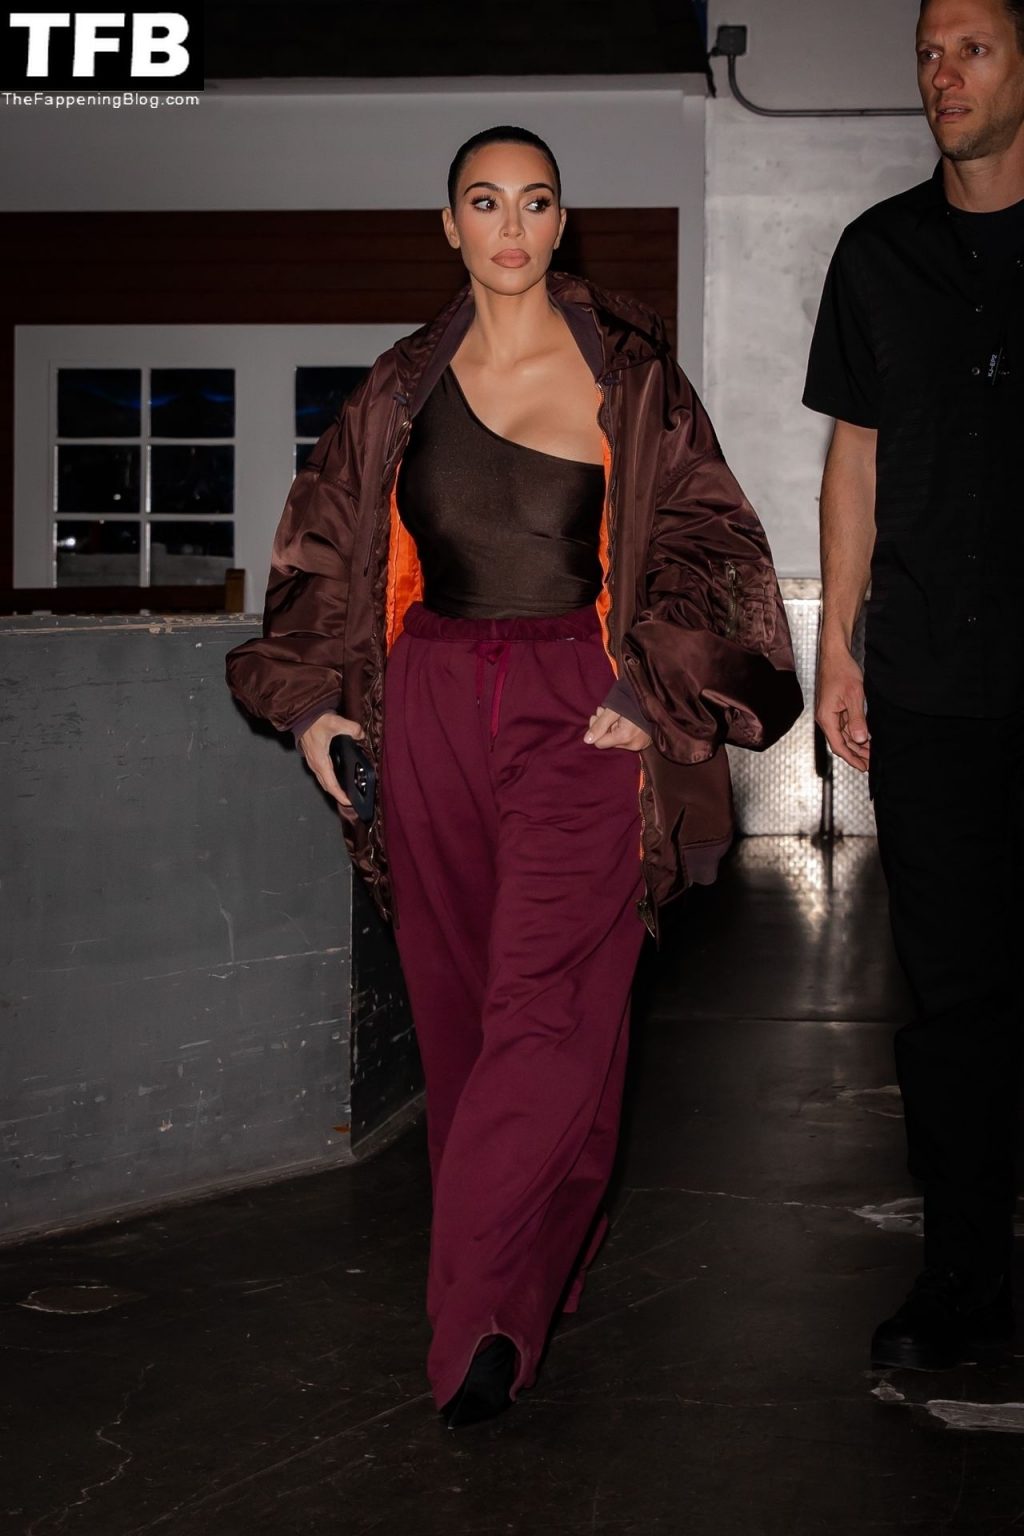 Kim Kardashian is Seen Braless After a Shoot at Chelsea Piers Sports Complex in NYC (27 Photos)